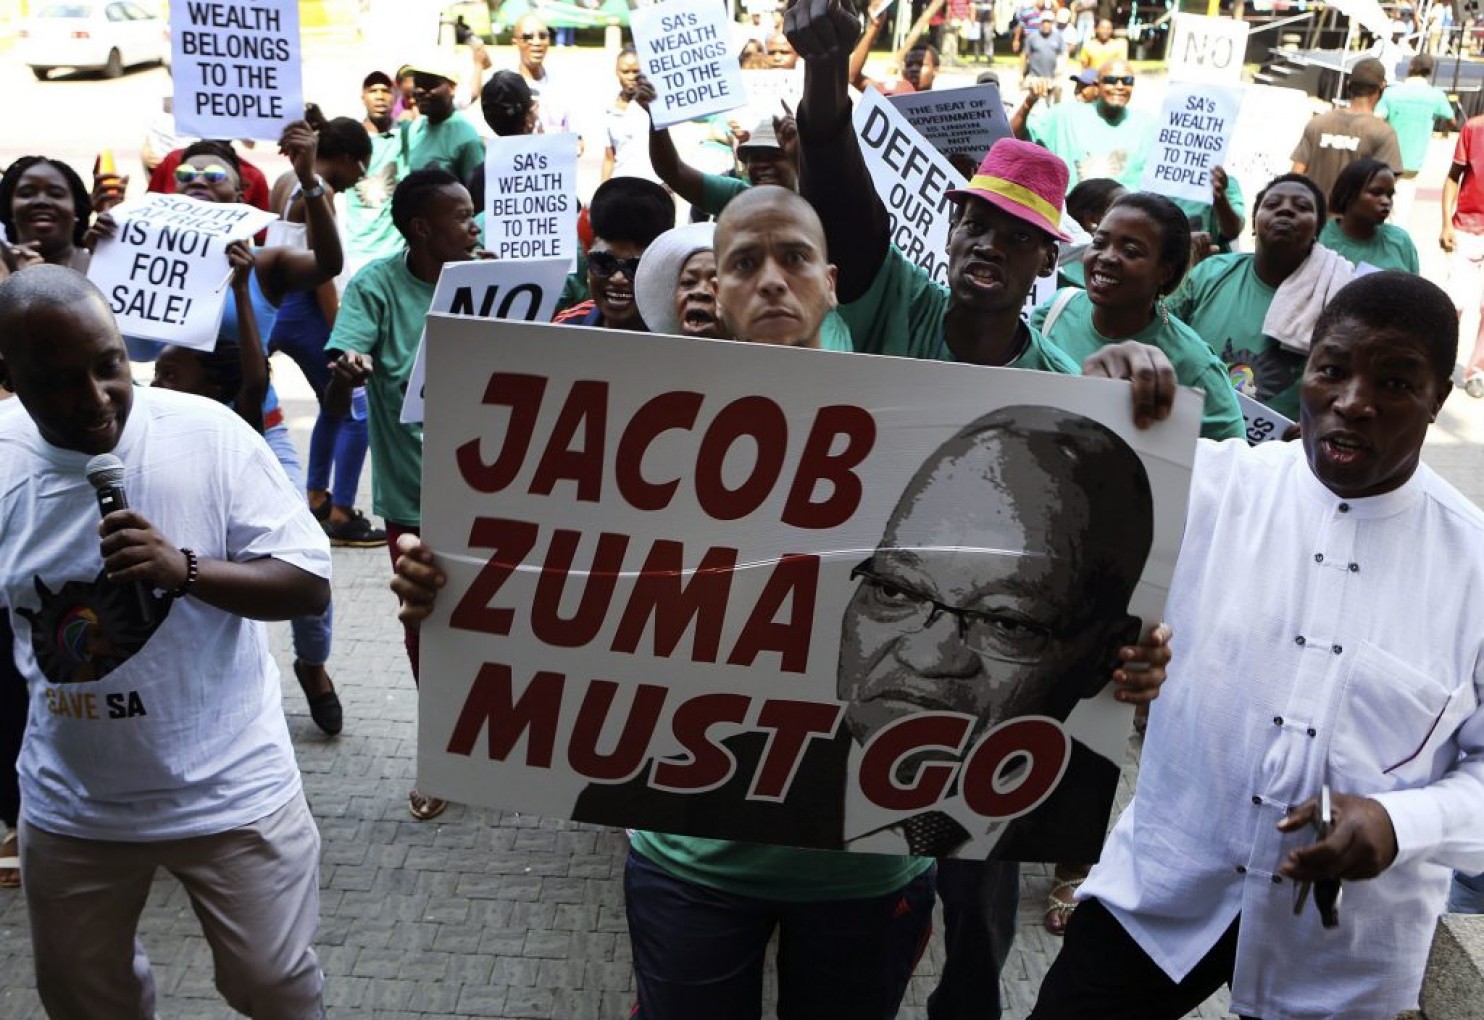 South Africa has reached its Mugabe moment